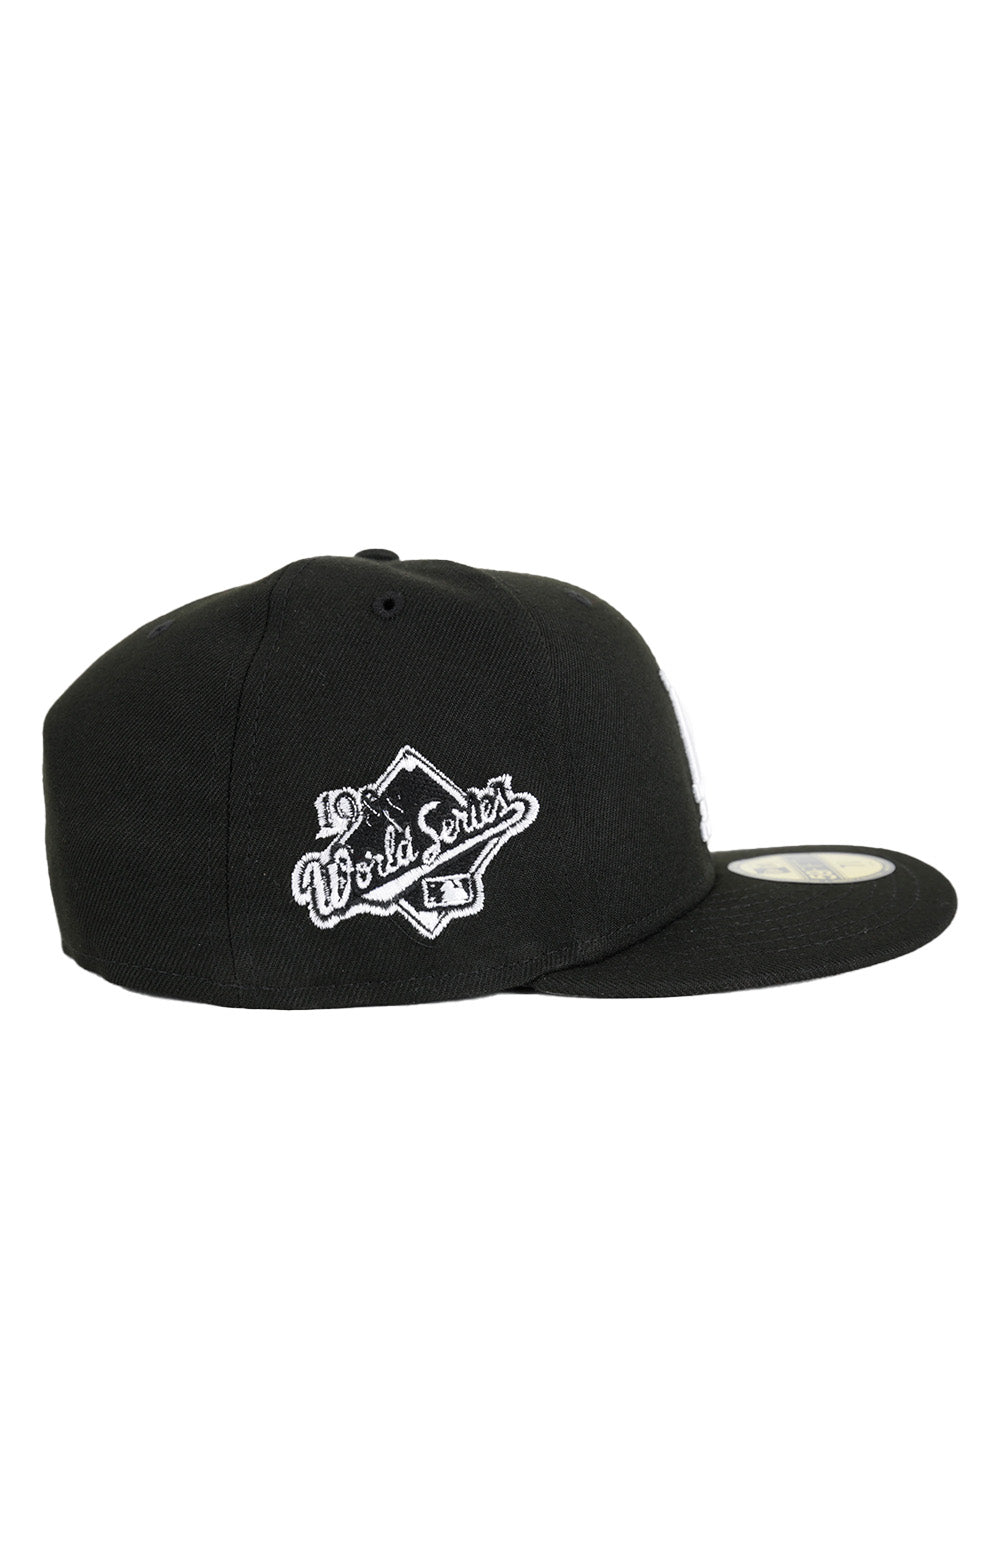 LA Dodgers Black/White 88 World Series Side Patch 59FIFTY Fitted Hat (60291295)